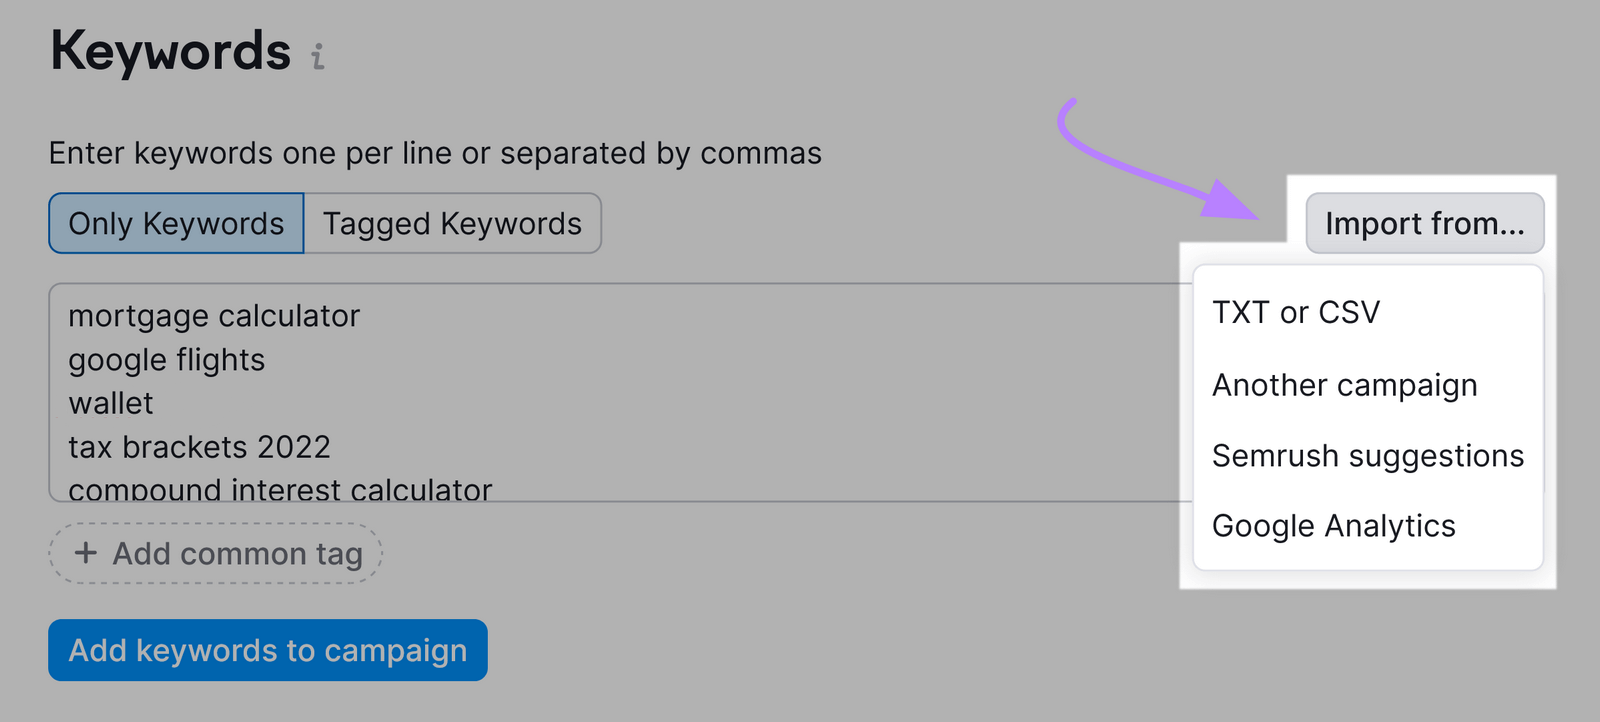 “Import from…” button with drop-down menu showing options